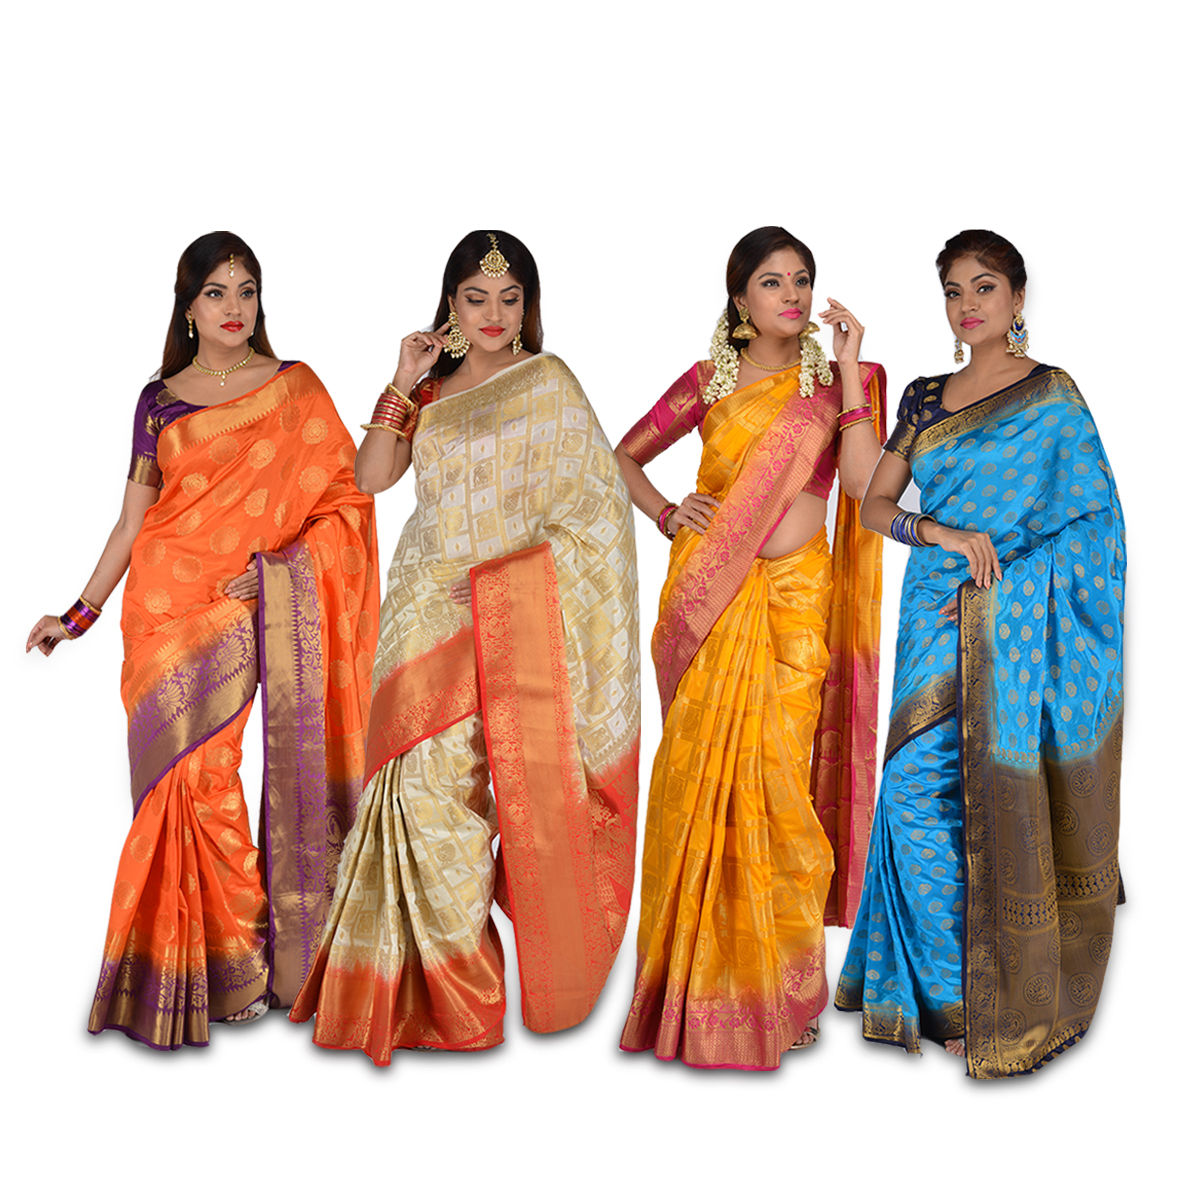 The Great Choice for Summer- Cotton Silk Saree